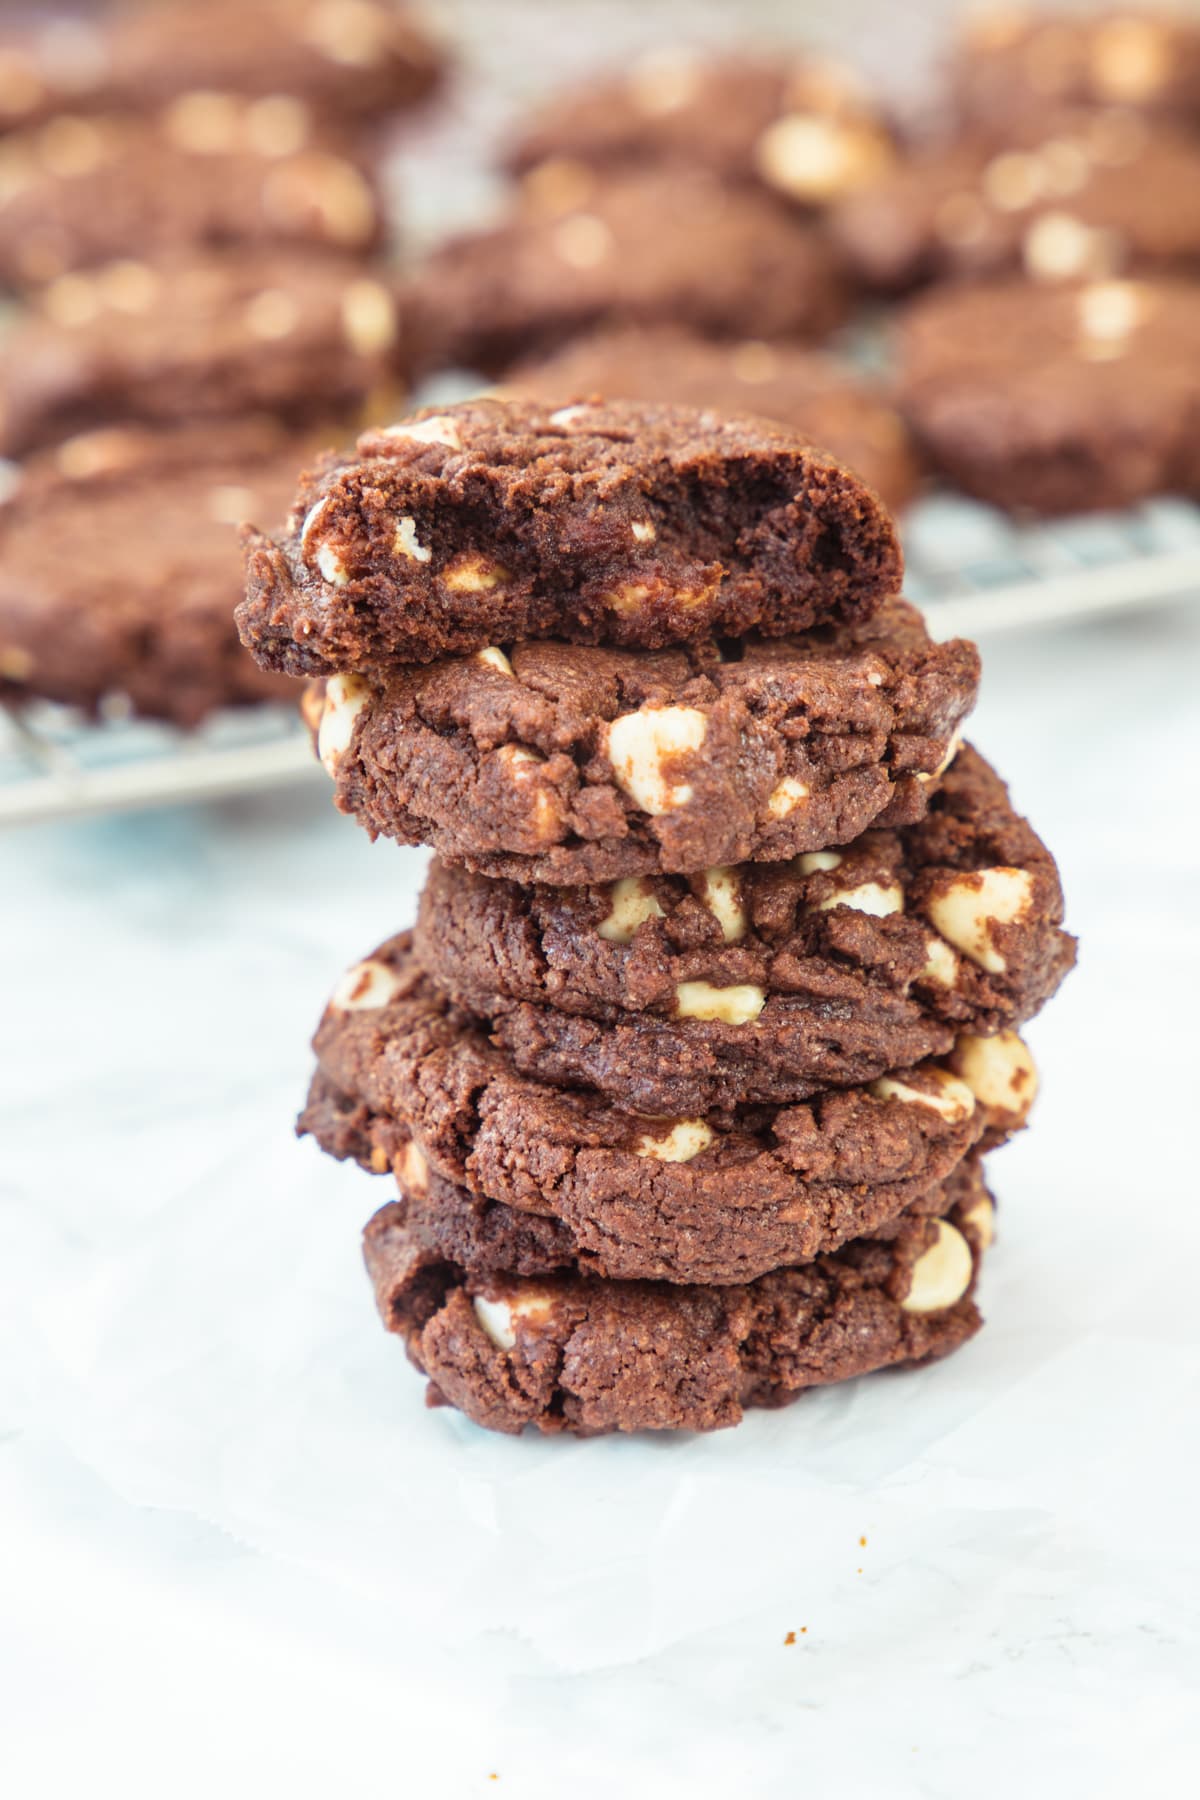 A stack of eggless chocolate cookies with top cookie has a bite taken.